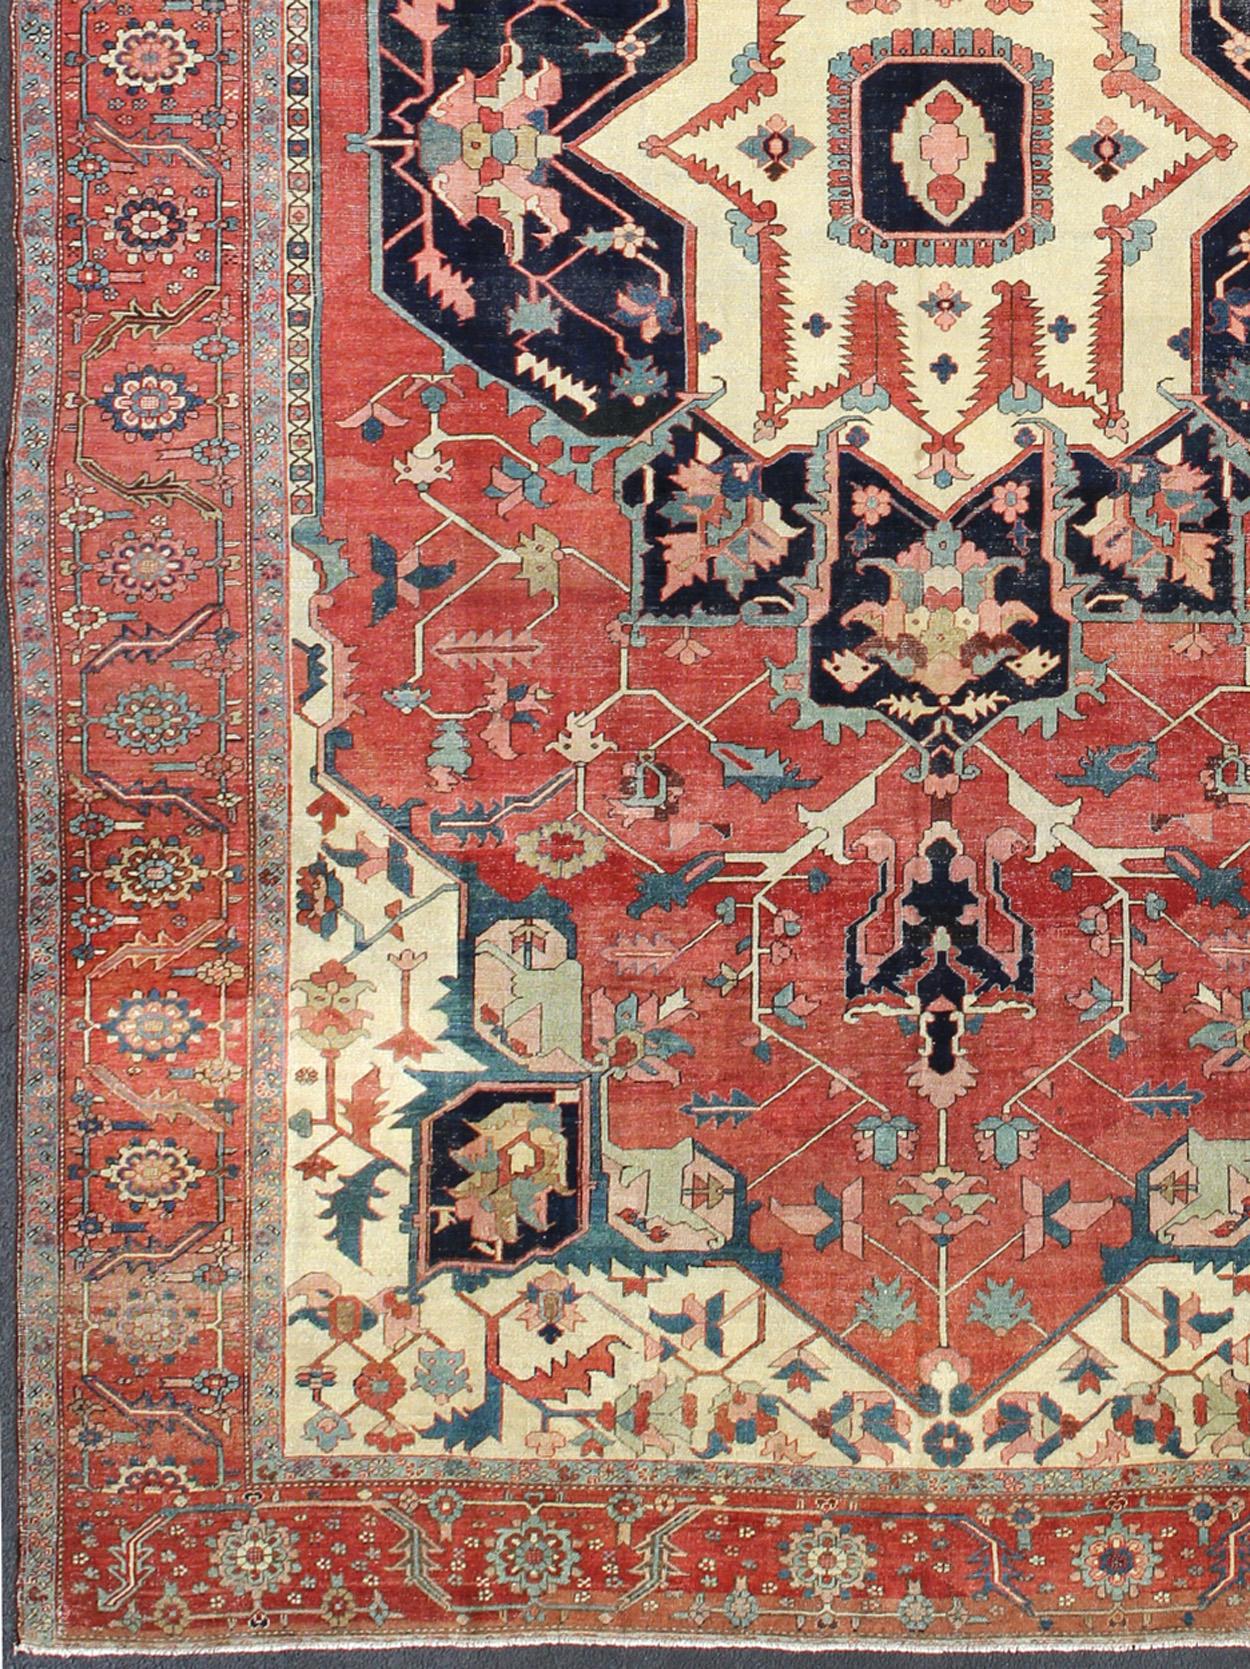 Large Antique Persian Serapi Rug in Faded Red, Teal, Navy Blue, and Ivory with Large Geometric Medallion, antique Persian Serapi rug / N15-1203, country of origin / type: Iran / Serapi

Serapi rugs are known as the finest rugs produced in the Heriz